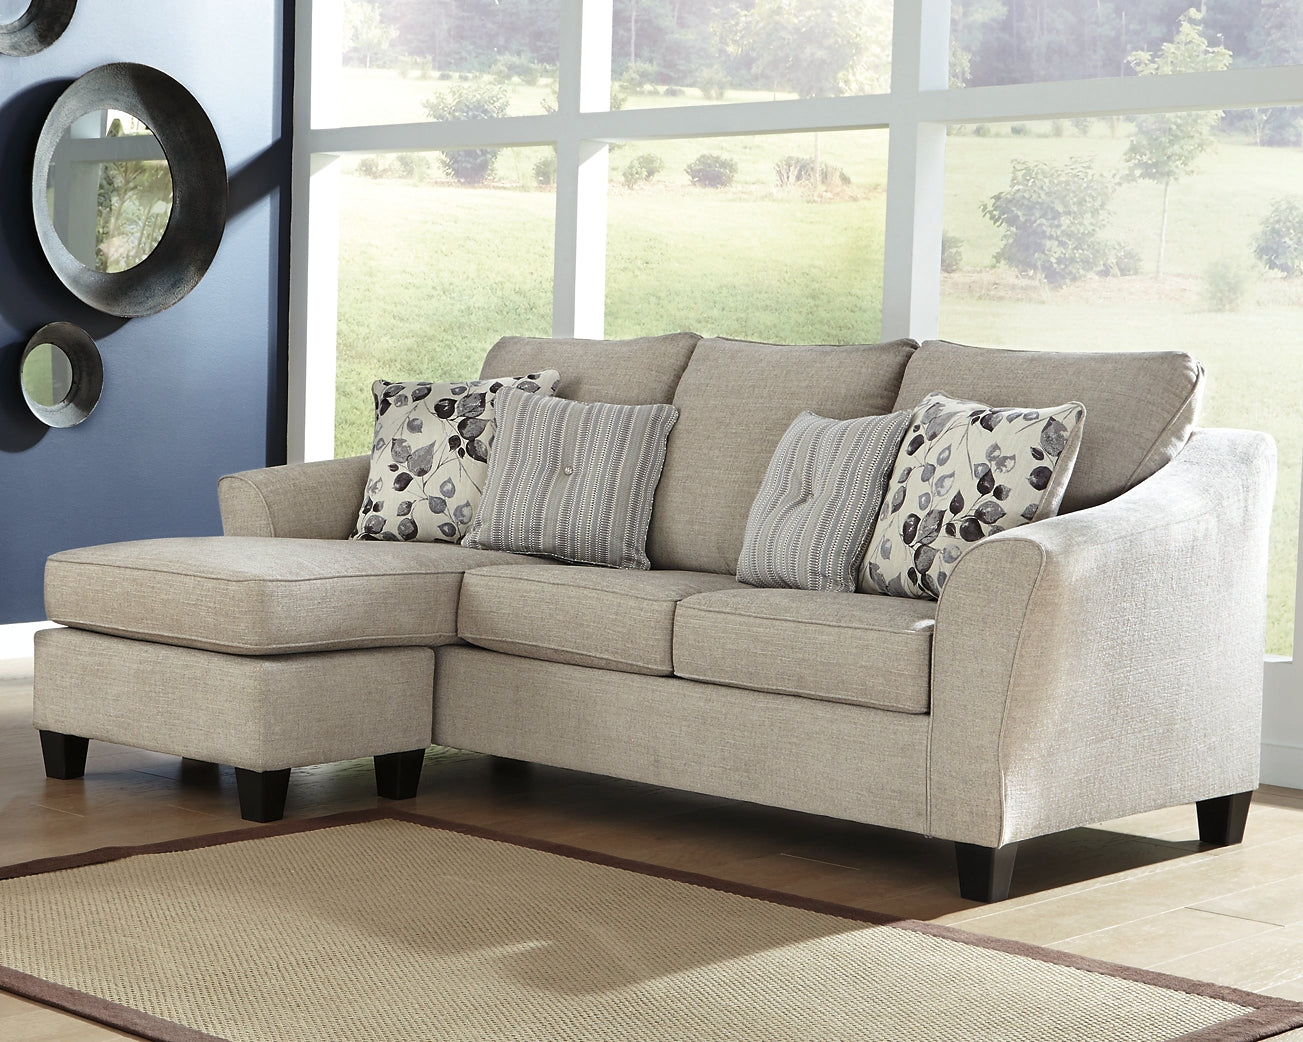 Abney Sofa Chaise, Chair, and Ottoman Wilson Furniture (OH)  in Bridgeport, Ohio. Serving Bridgeport, Yorkville, Bellaire, & Avondale